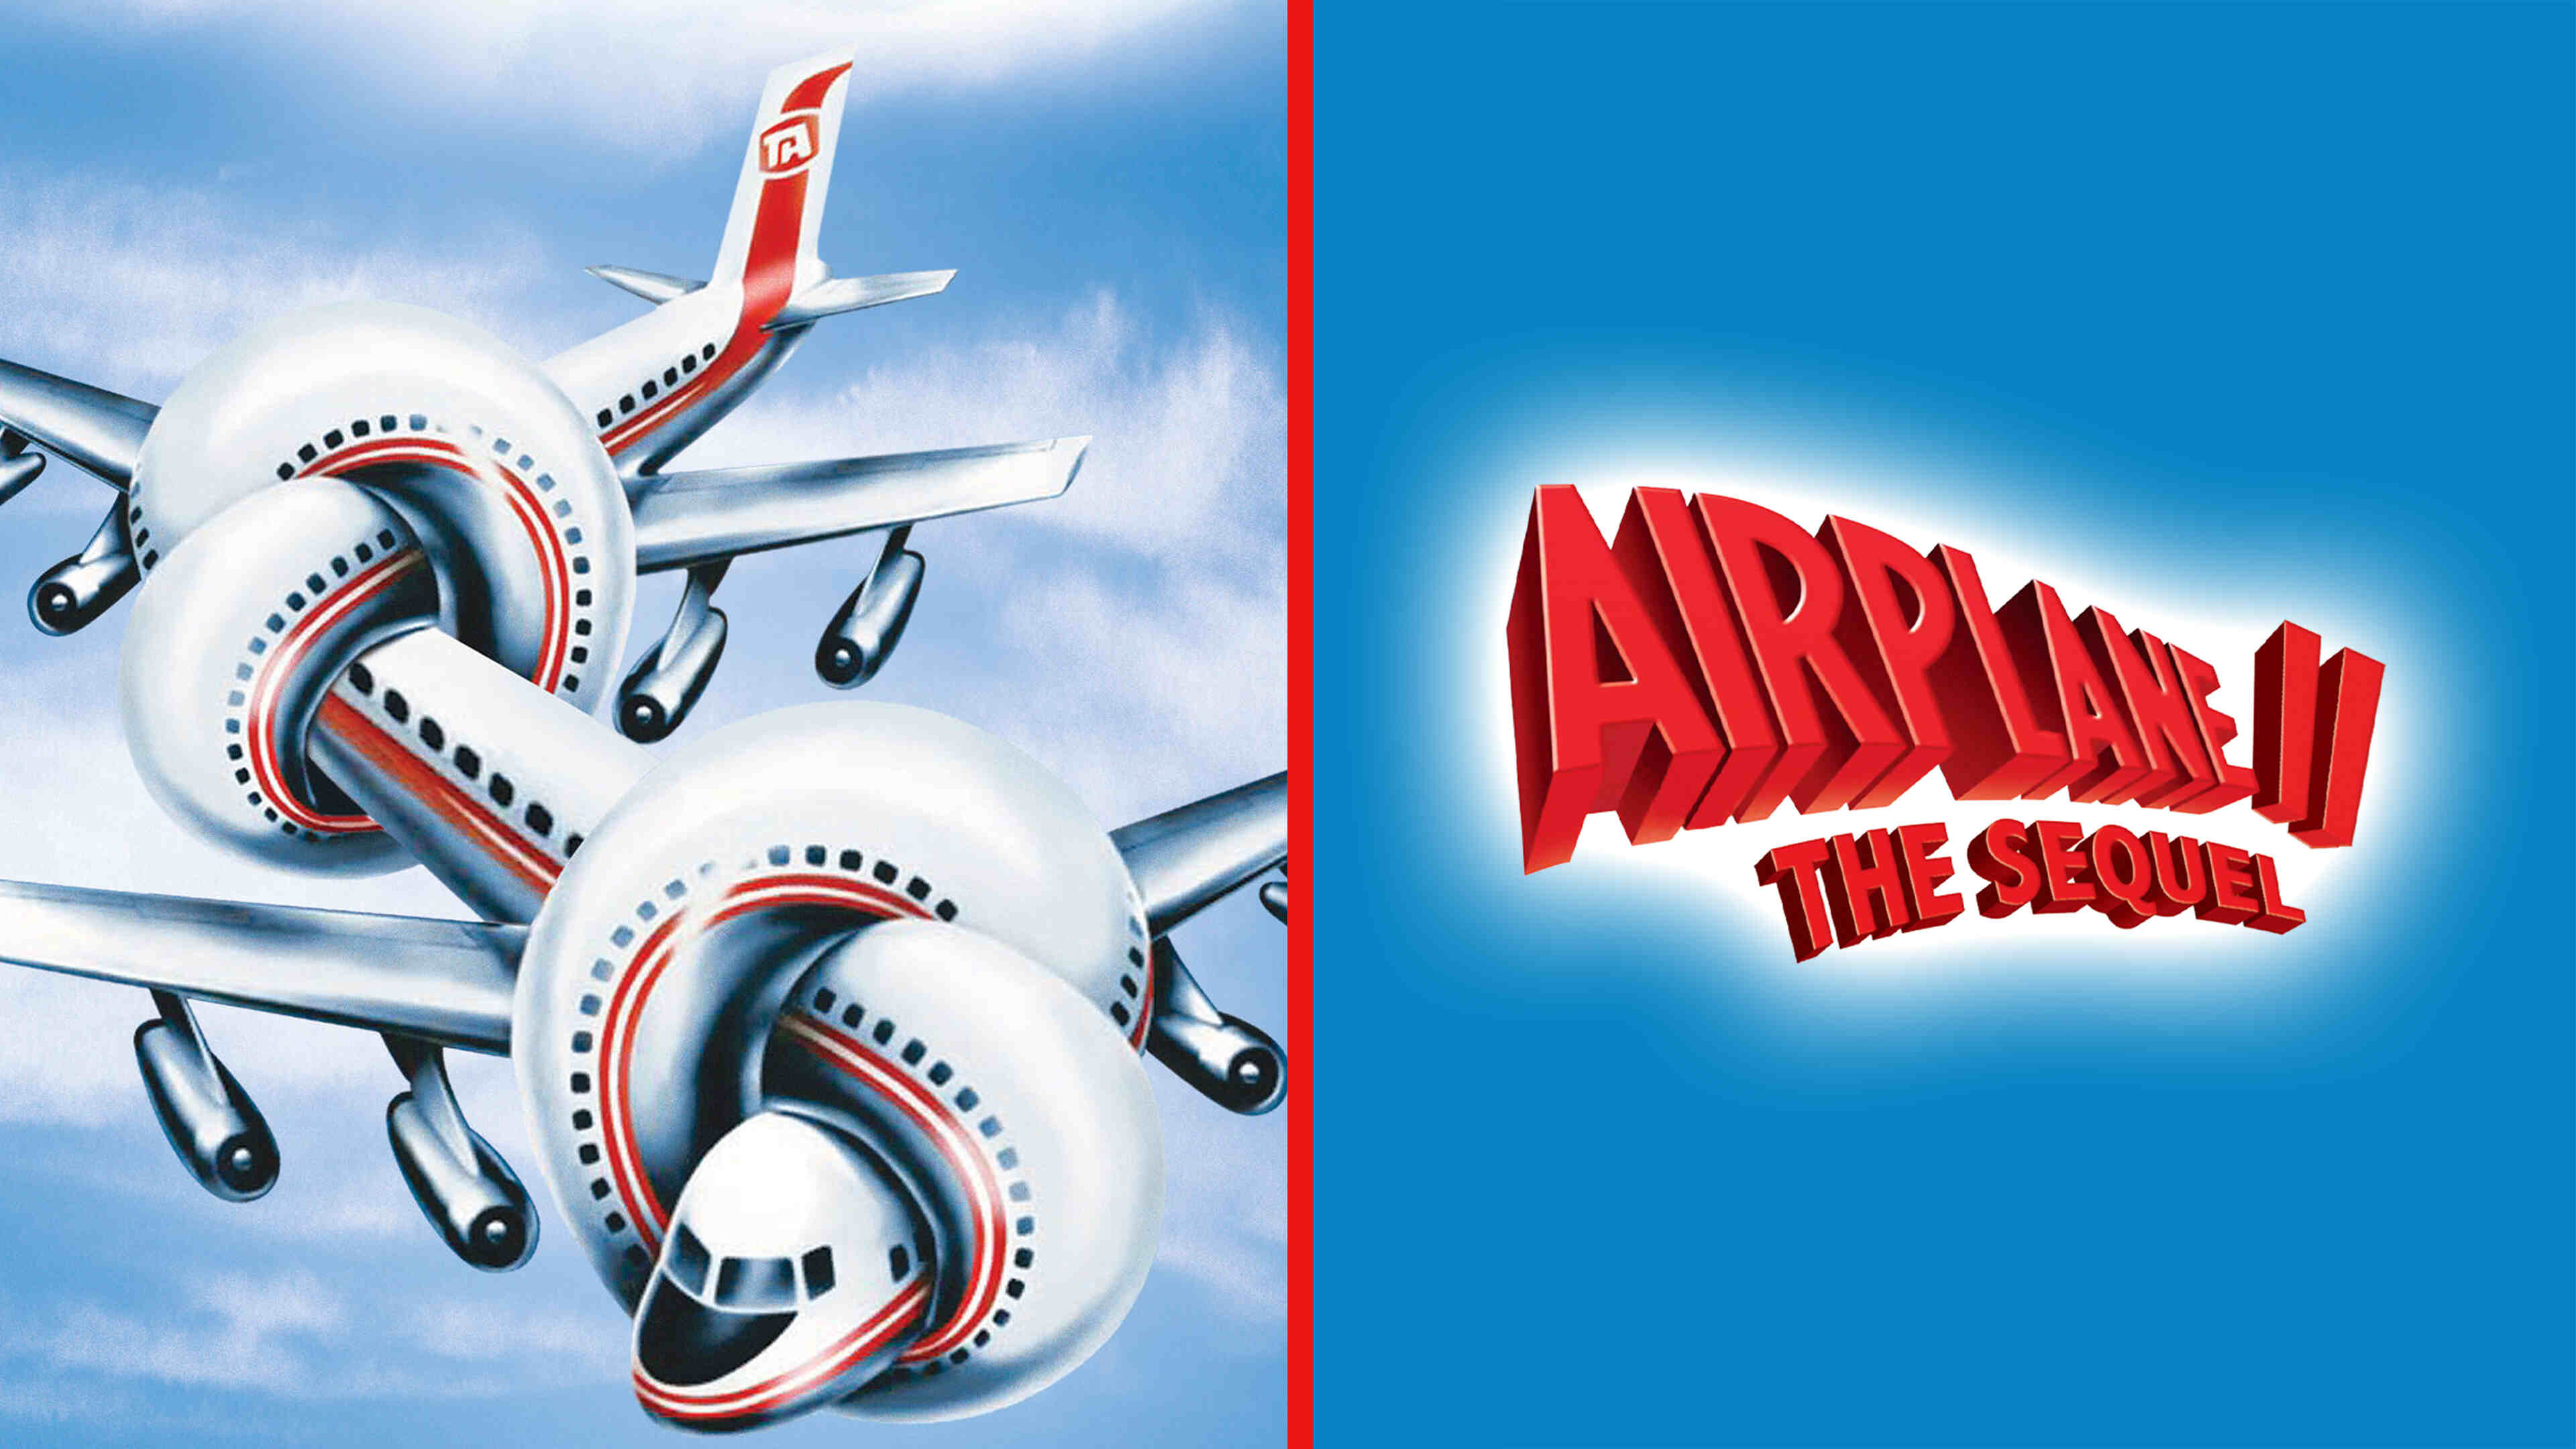 39-facts-about-the-movie-airplane-ii-the-sequel